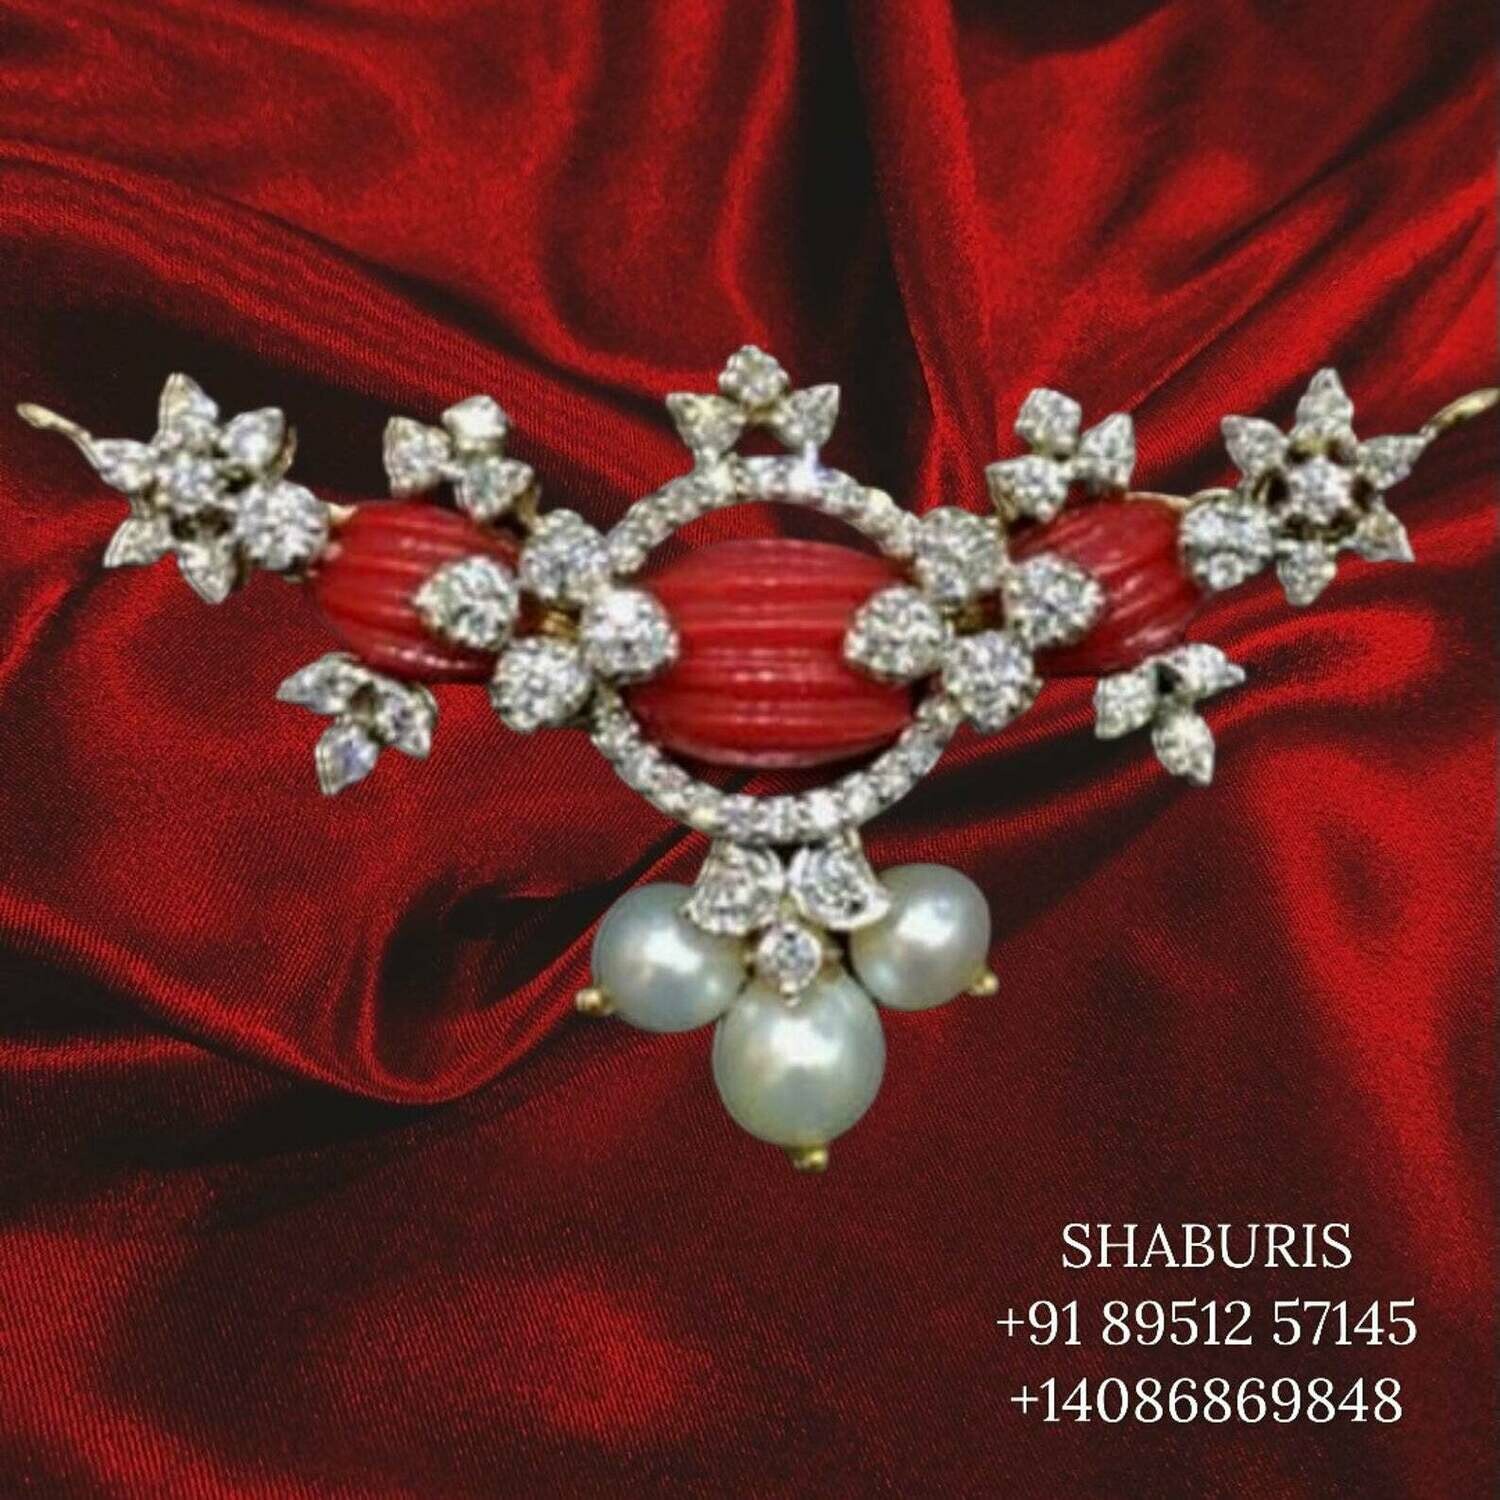 Latest Indian Jewelry,South Indian jewelry,Pure silver diamond pendent,coral pendant,south Indian Jewelry -SHABURIS